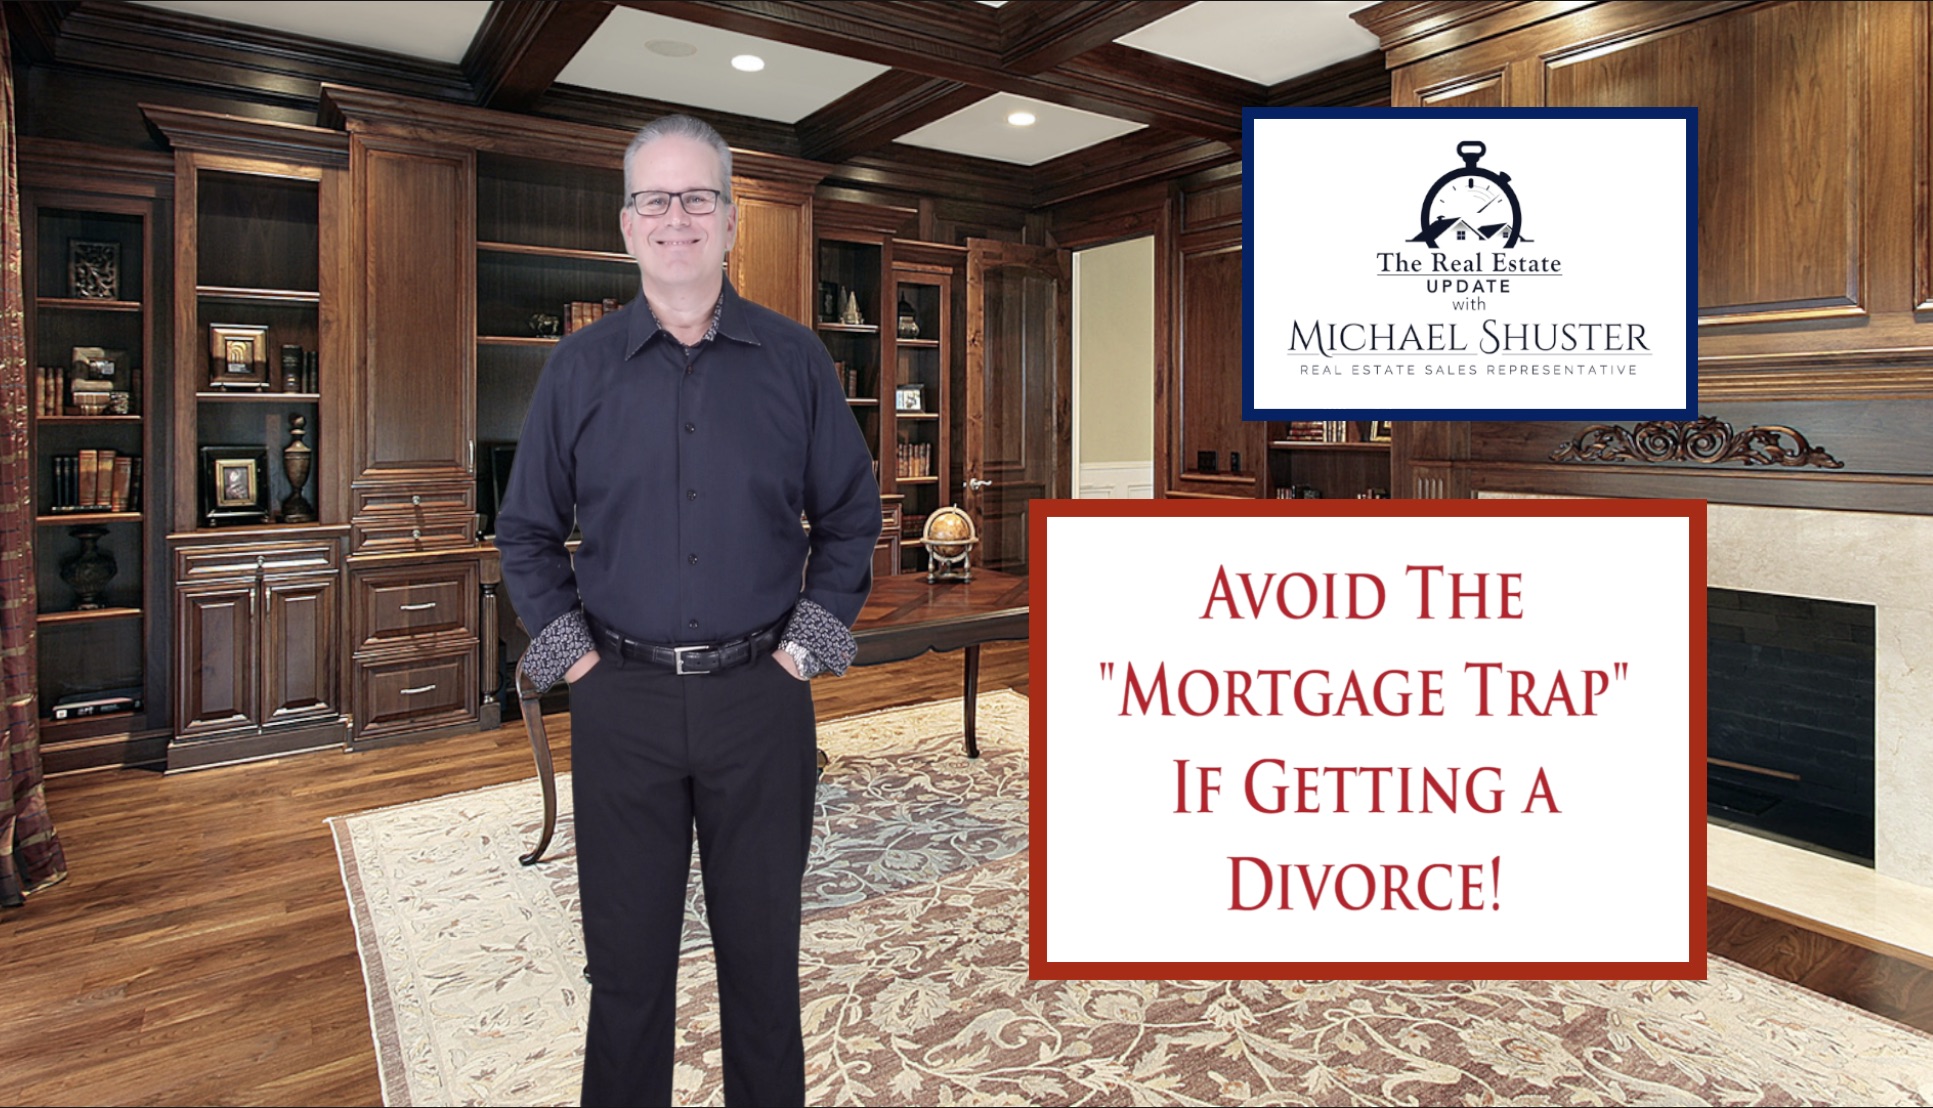 Avoid The Mortgage Trap If Getting a Divorce